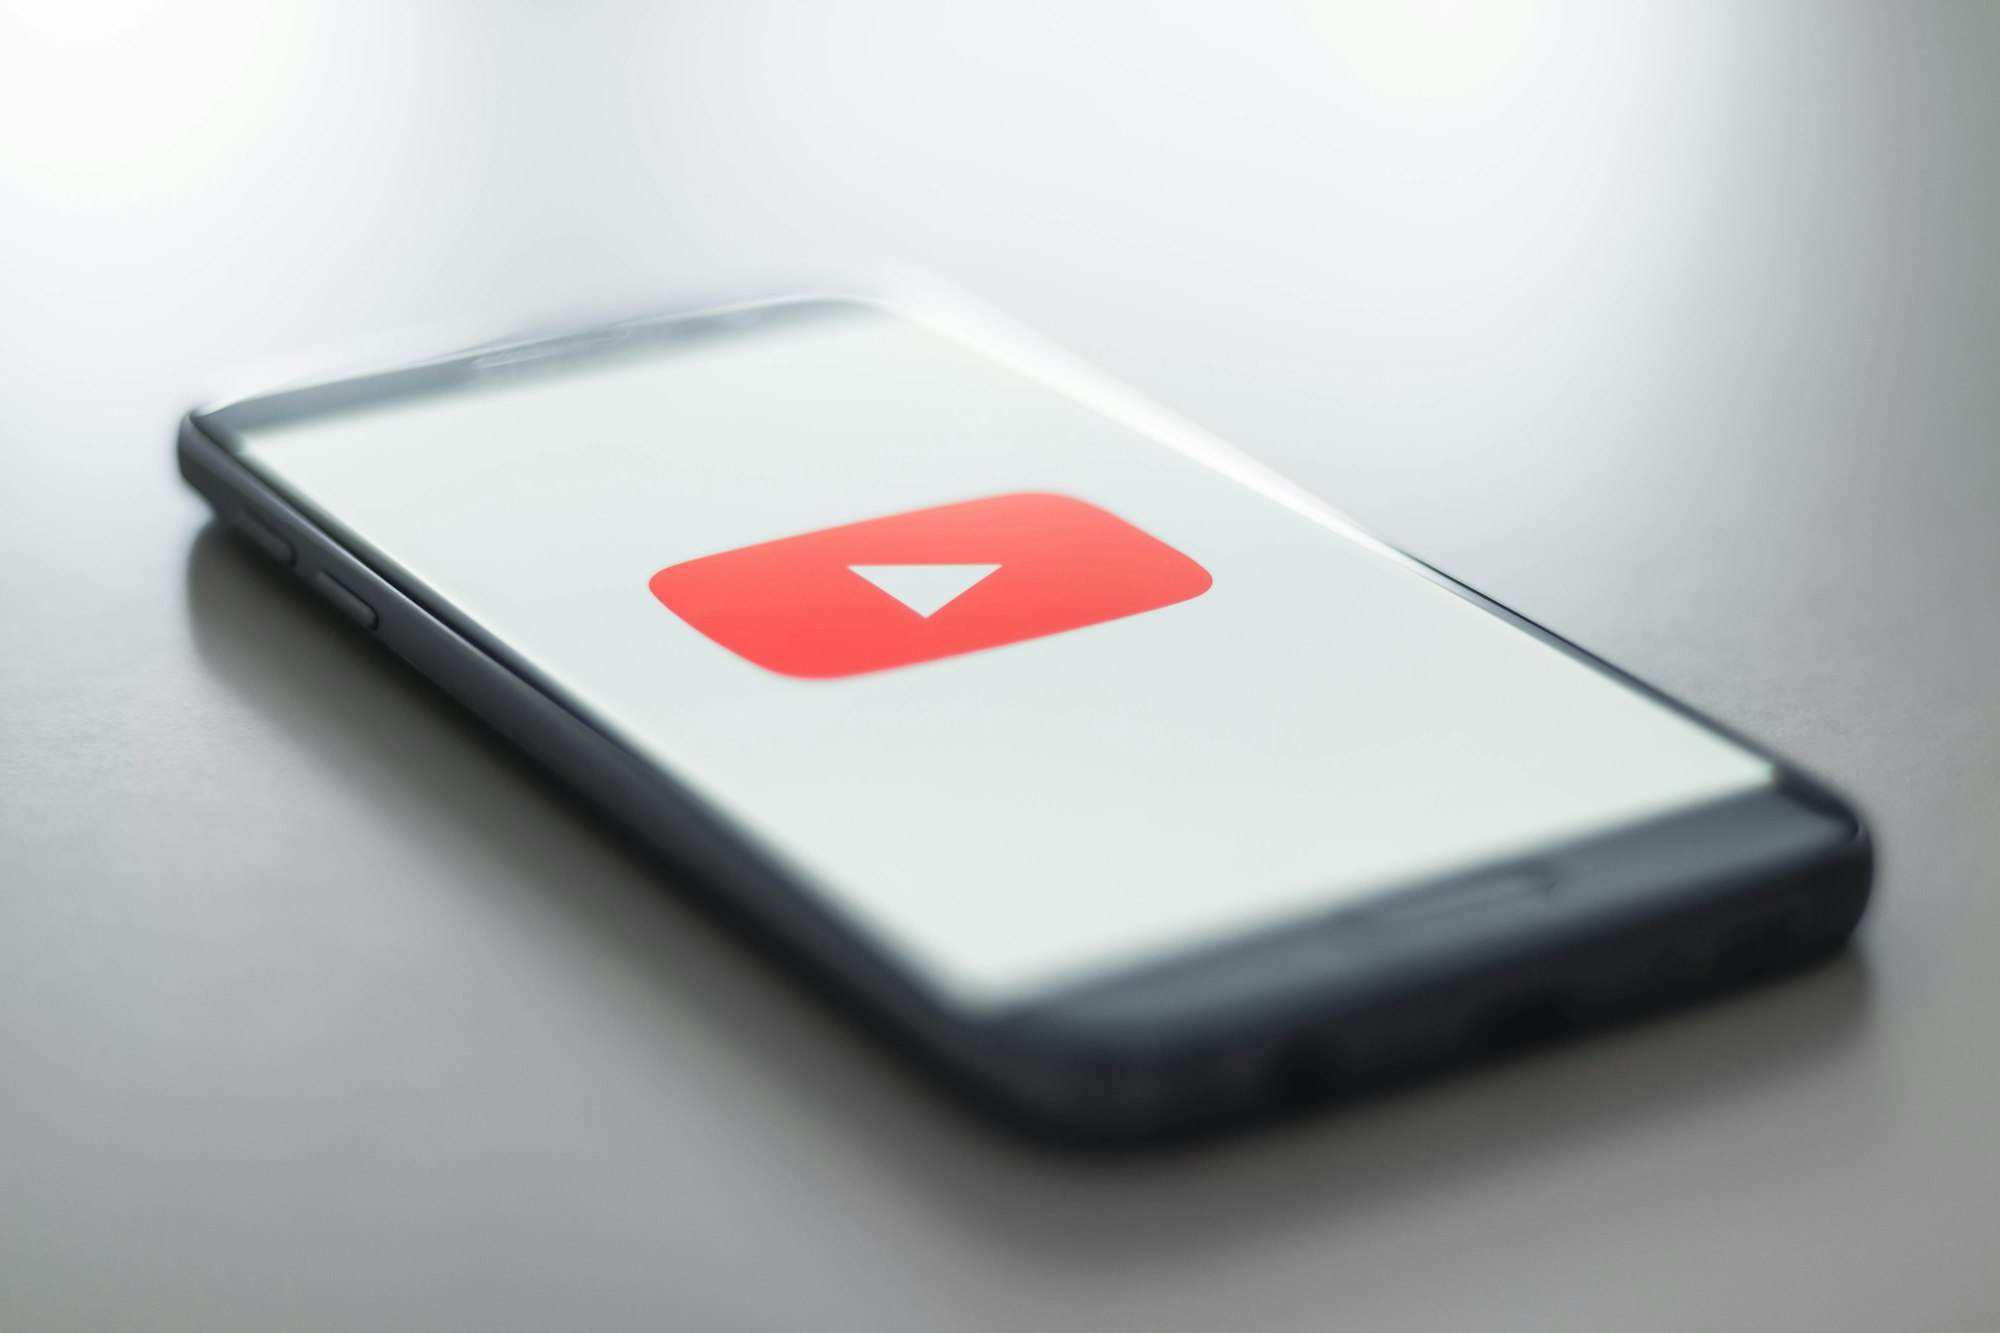 YouTube launches Primetime Channels, bringing more movie streaming services to its platform